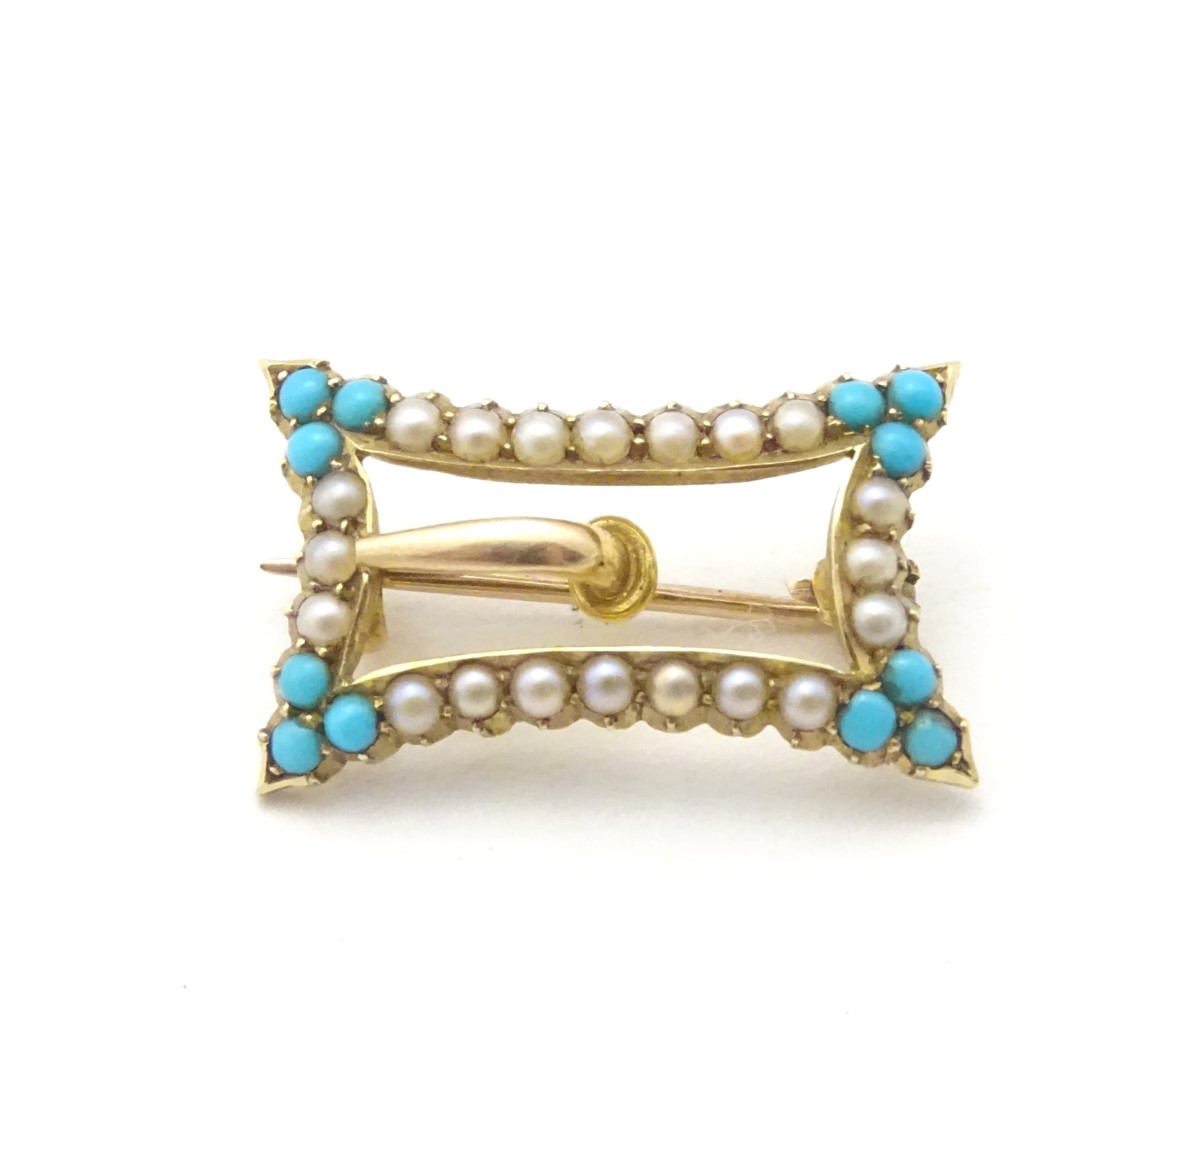 A late 19thC / early 20thC 15ct gold buckle formed brooch set with turquoise and seed pearl. - Image 4 of 9